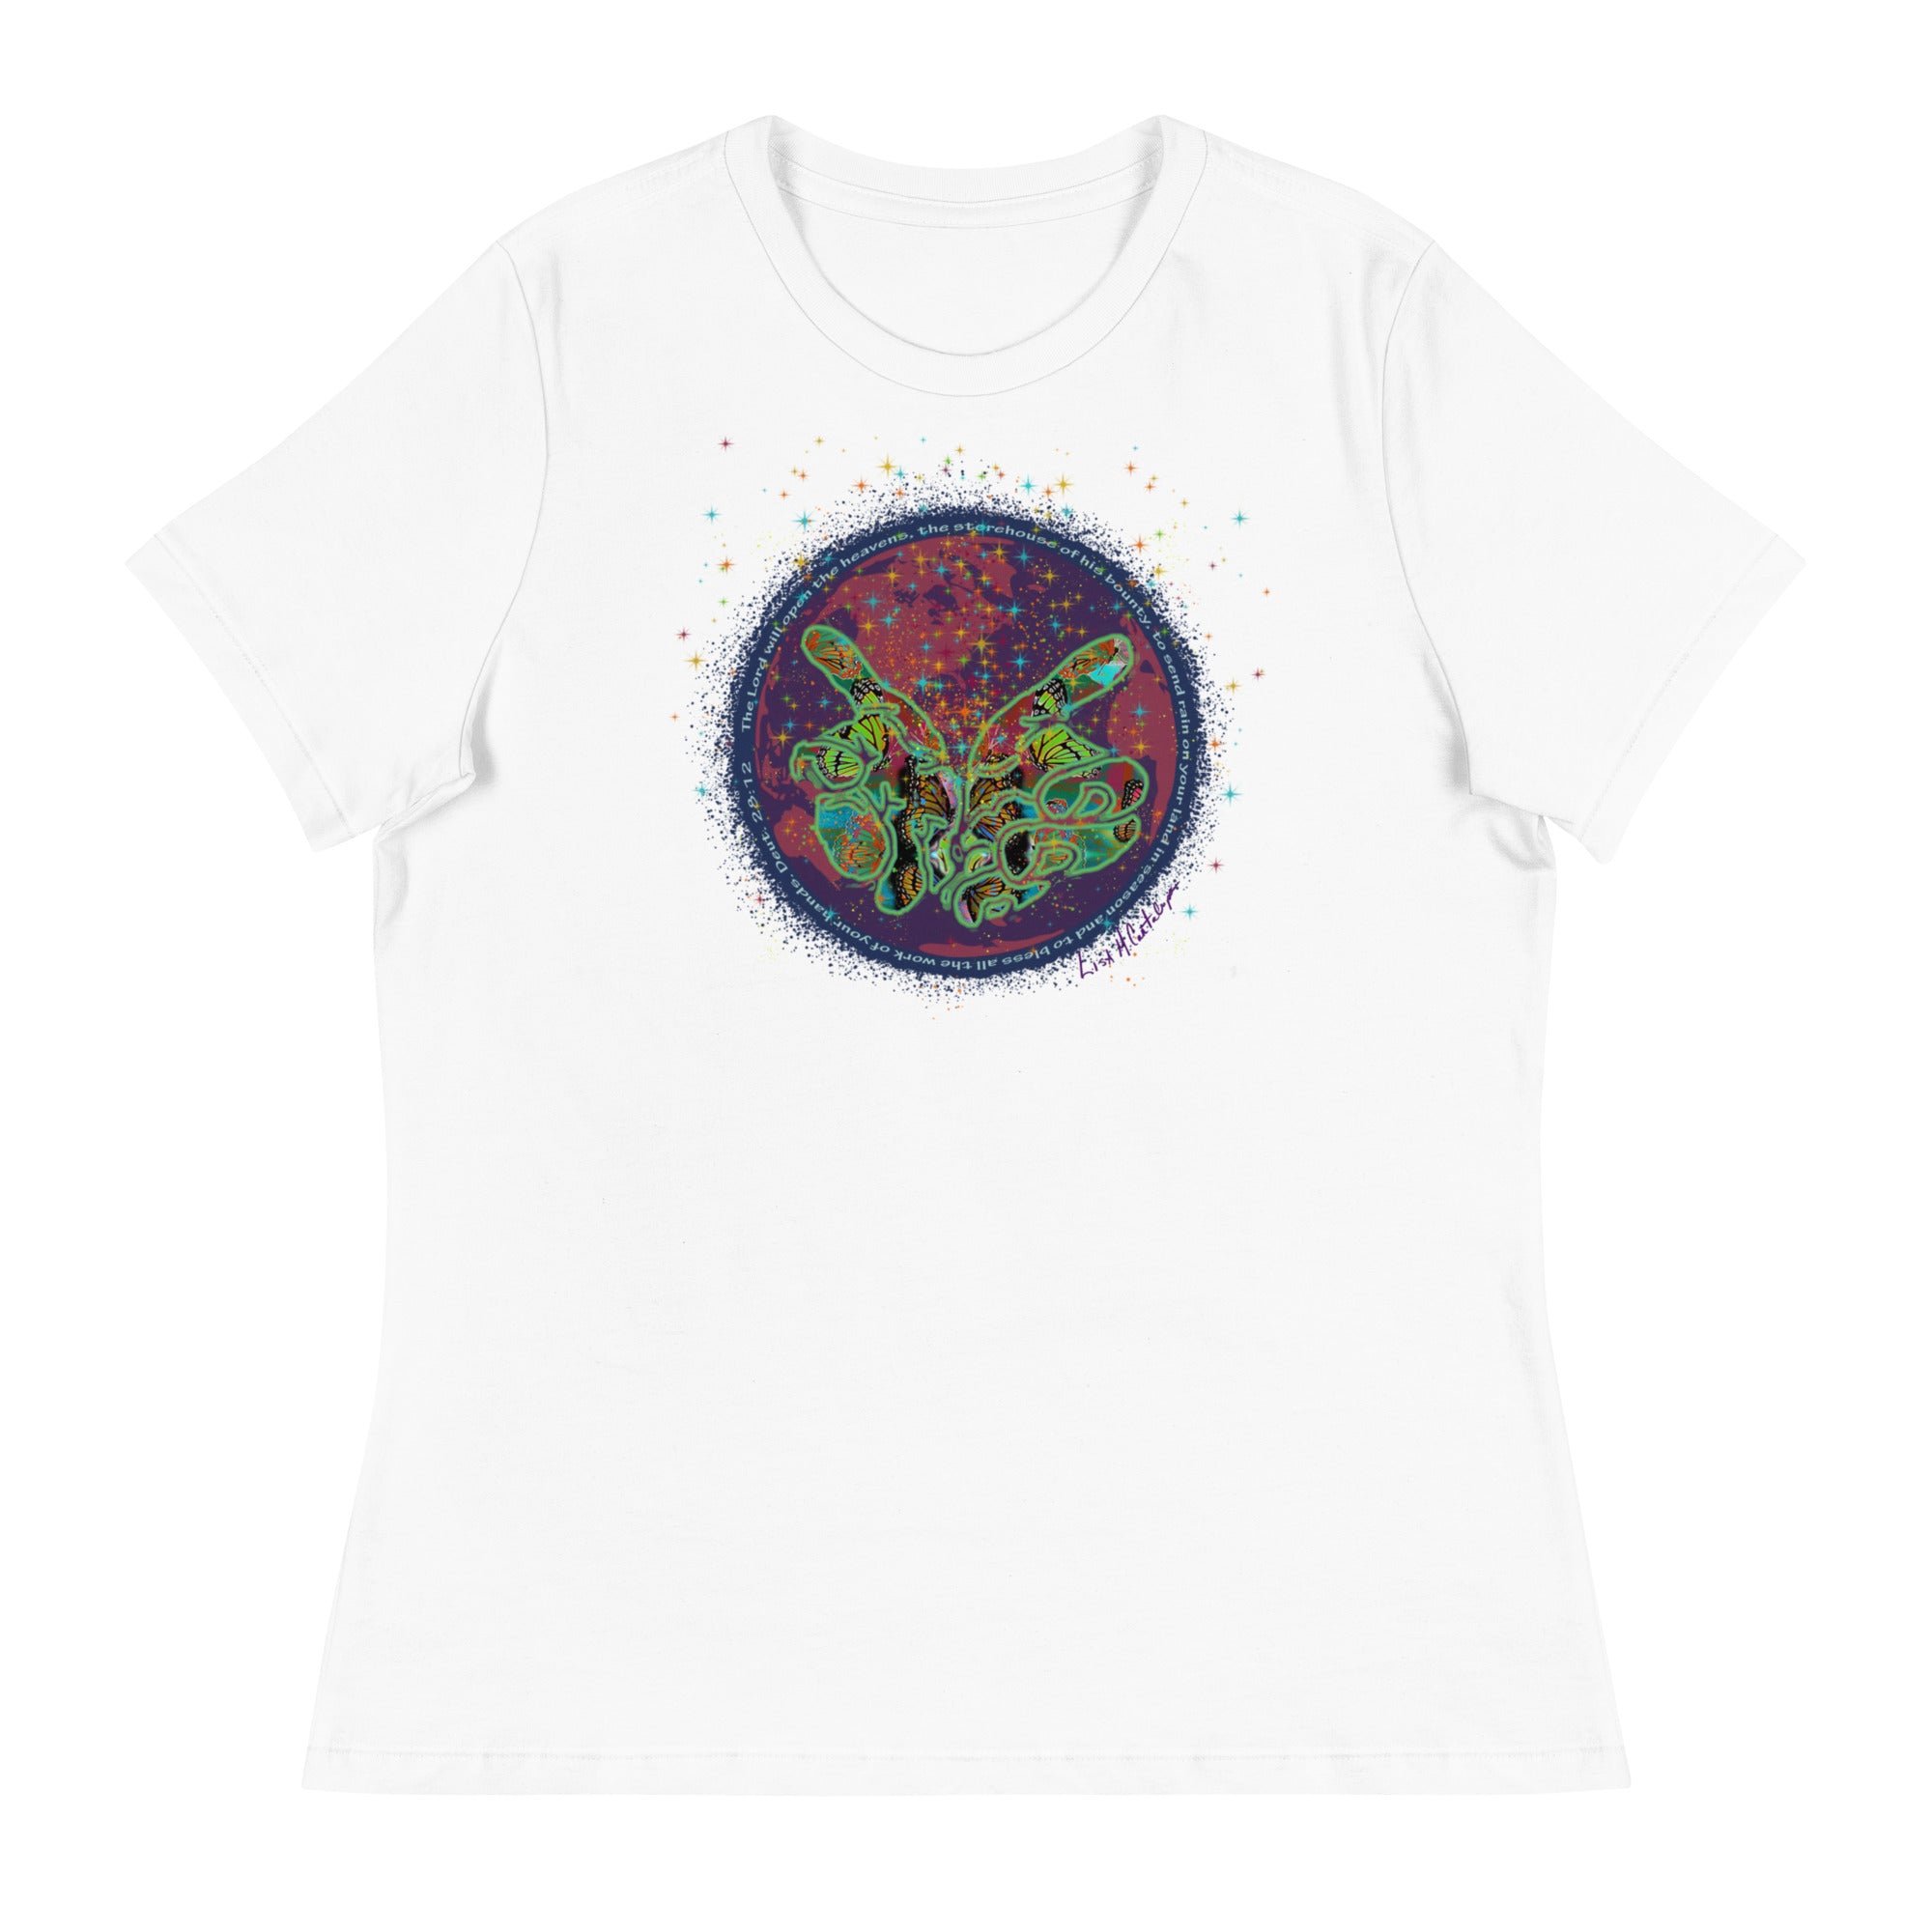 BLESSINGS of Work of HANDS ~ Women's  Graphic T-Shirt, Butterfly Word Art Short Sleeve Top